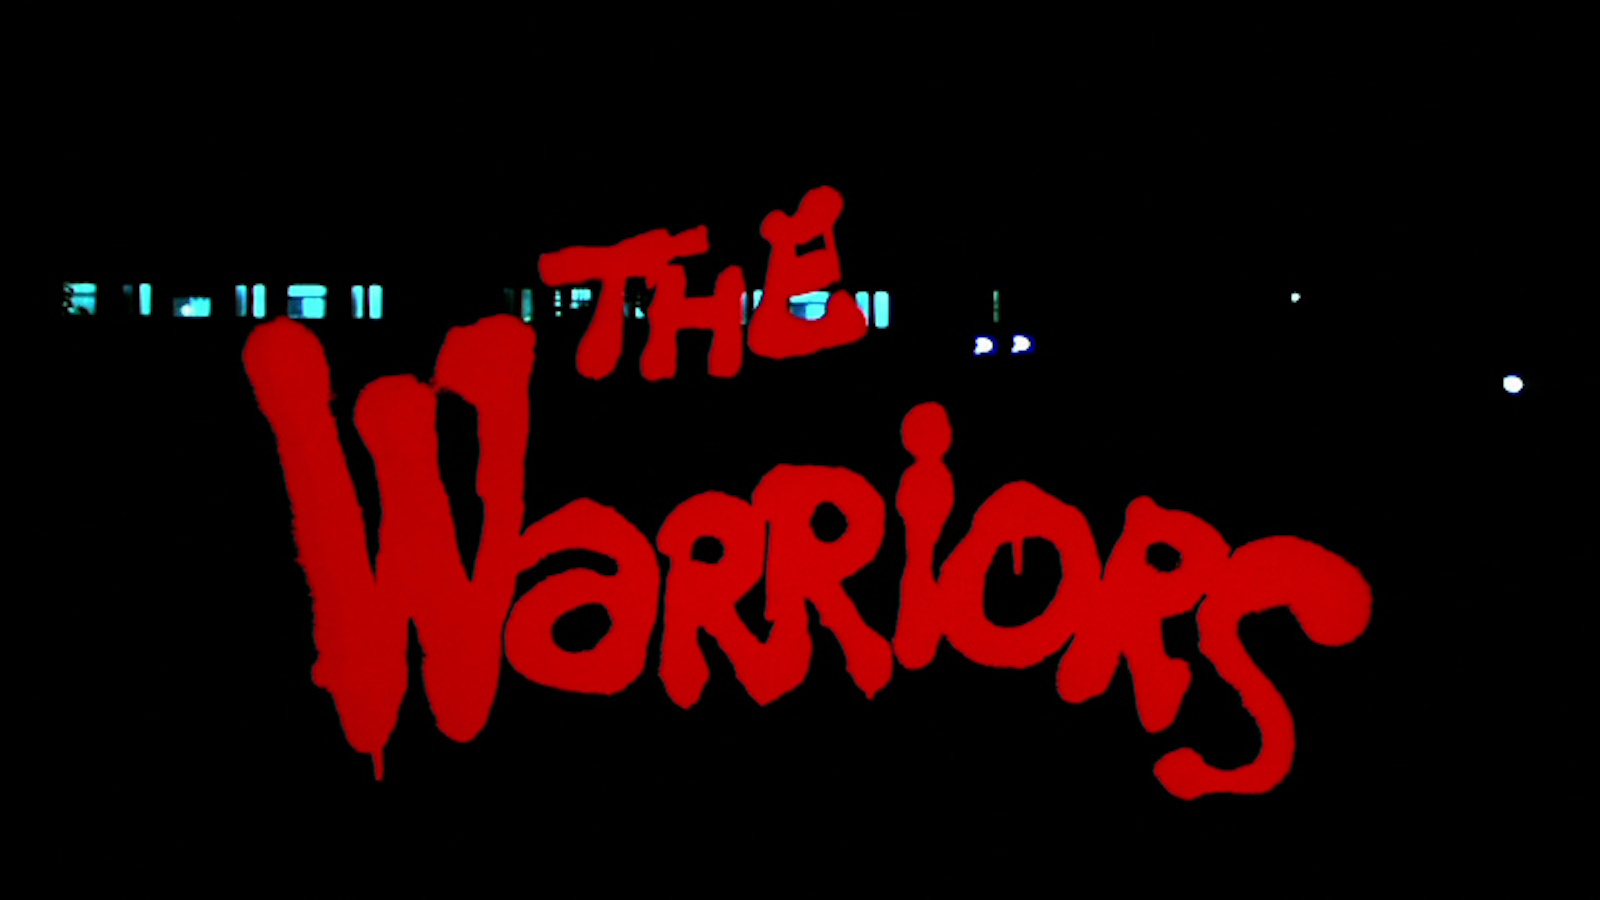 The title screen of the film "The Warriors"